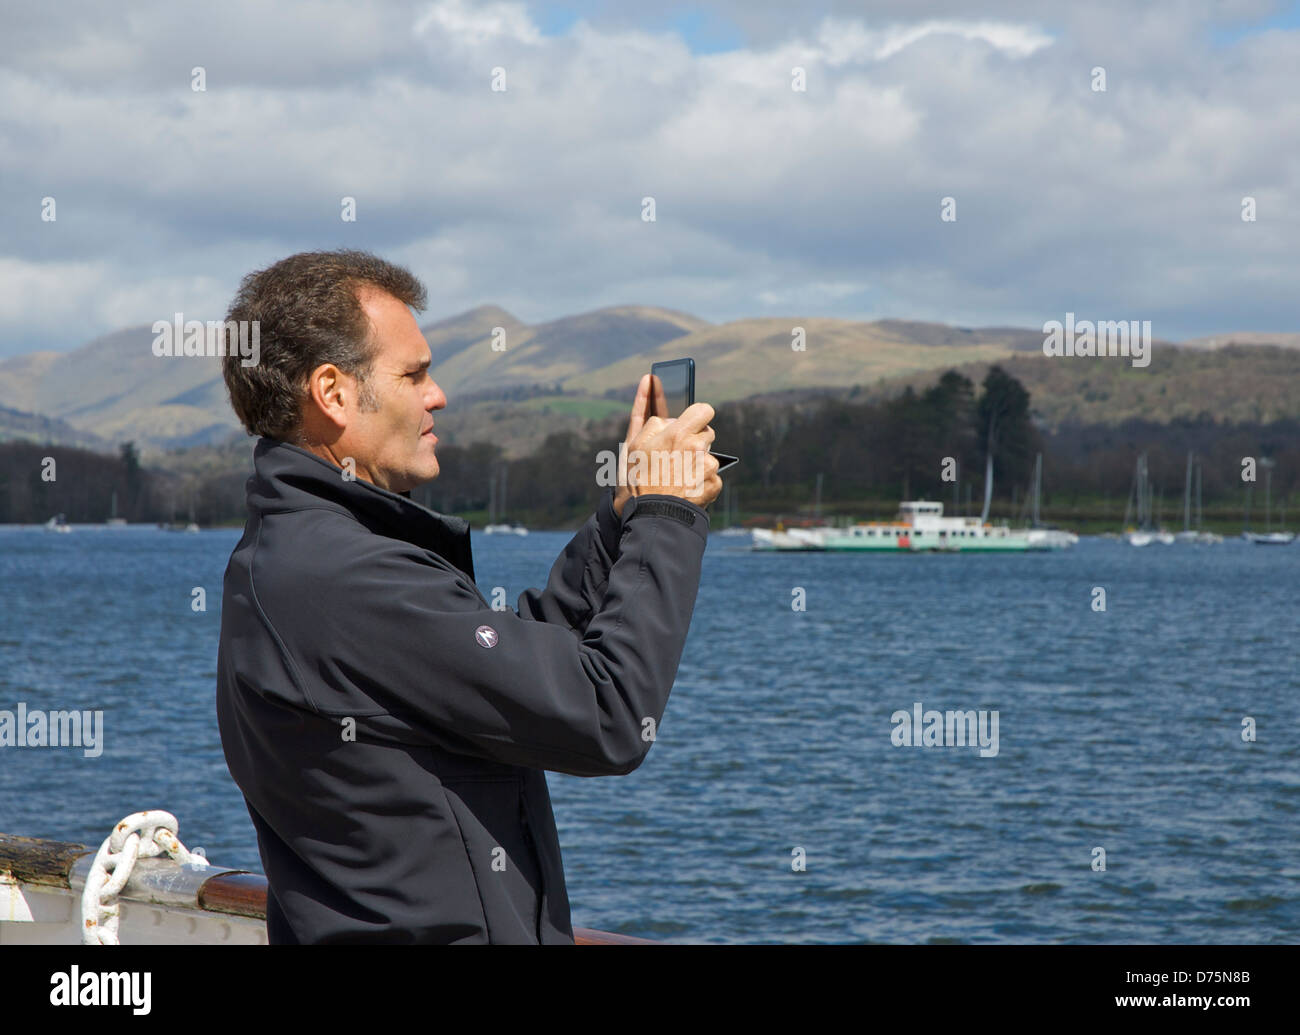 Man taking pictures on his iPad tablet computer, Lake Windermere, Lake District National Park, Cumbria, England UK Stock Photo